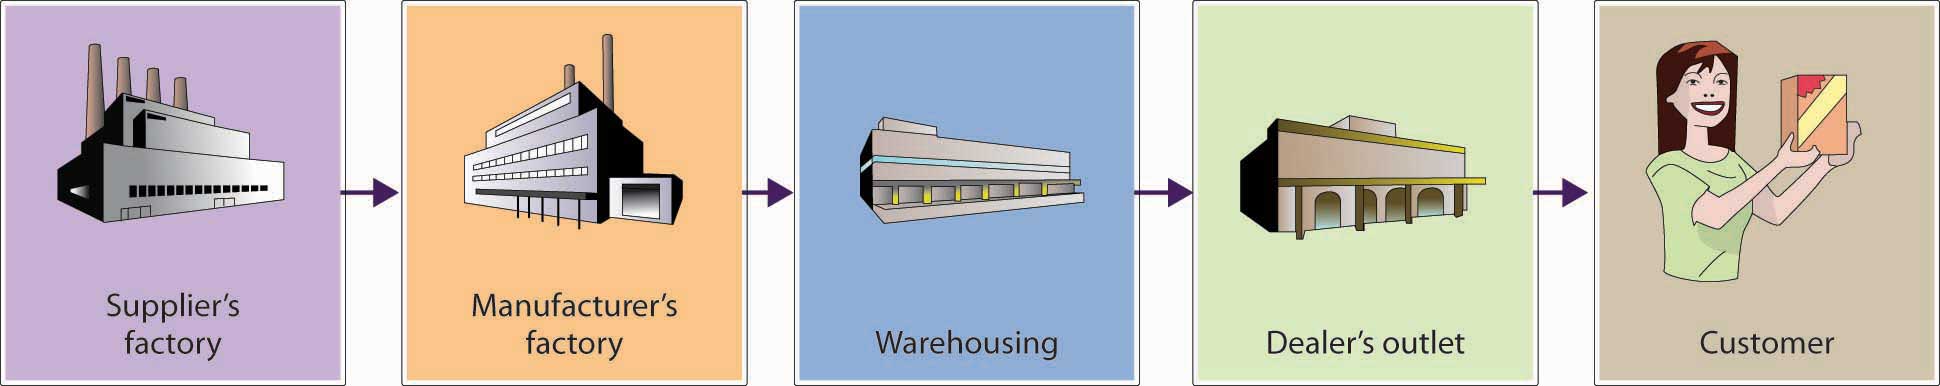 Supply Chain flow chart starting at Supplier's factory, to Manufacturer's factory, to Warehousing, to Dealer's outlet, and ending Customer